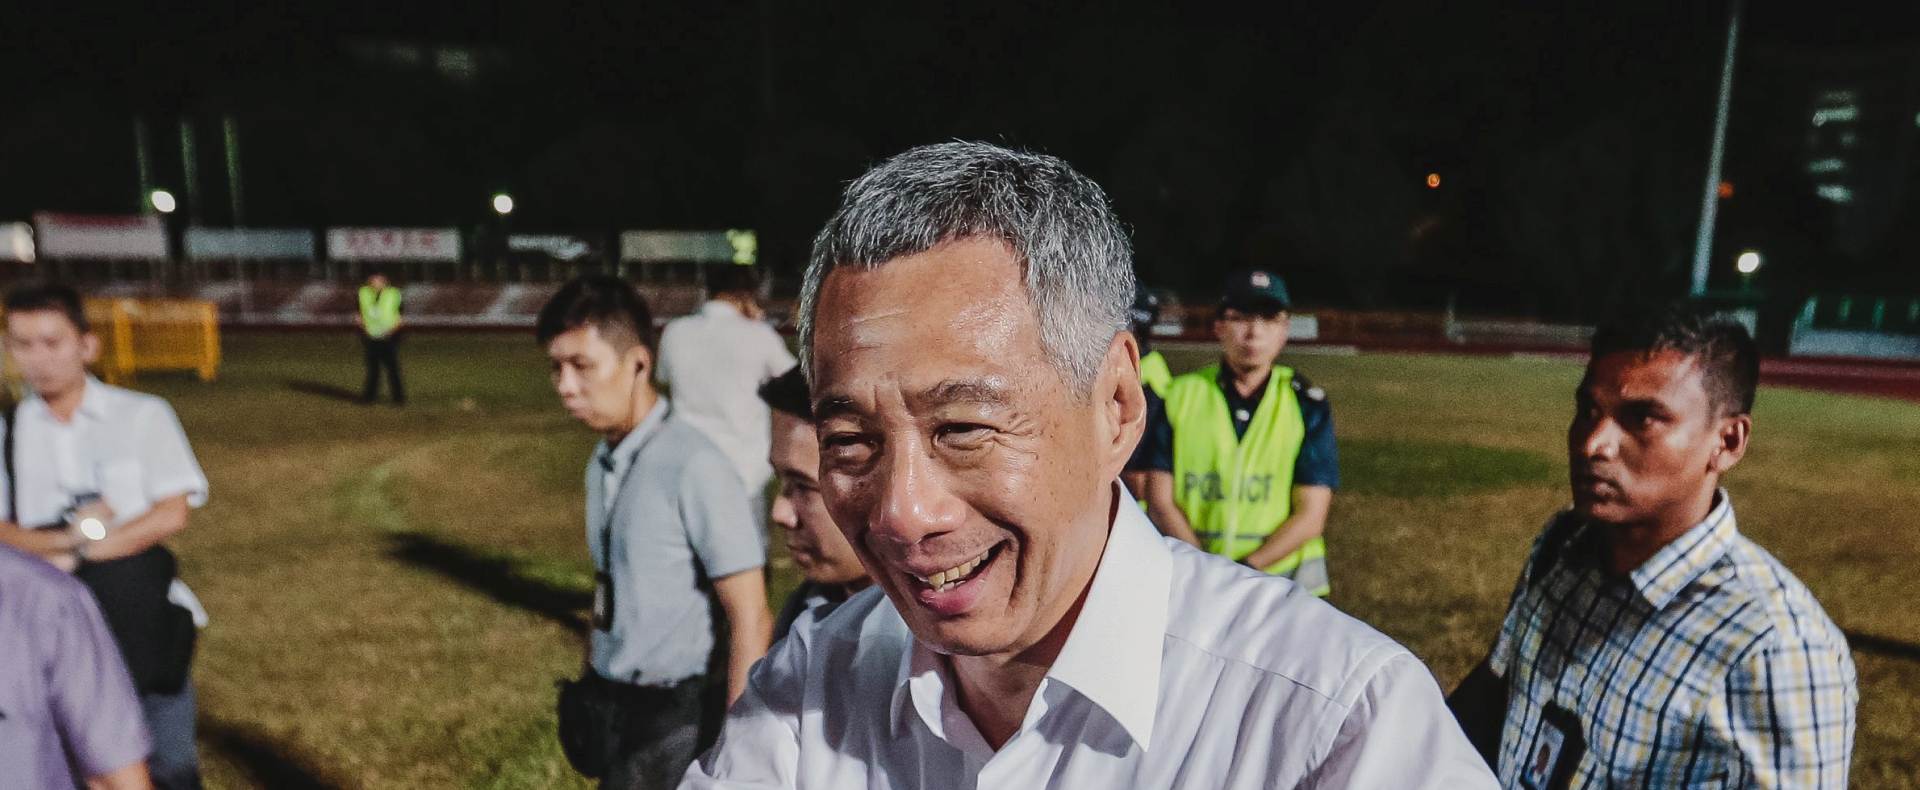 epa04925674 Singapore Prime Minister and secretary general of the ruling People's Action Party (PAP) Lee Hsien Loong arrives at the Toa Payoh stadium where supporters have gathered to hear the announcements of the results in the Singapore General election, 11 September 2015. All 89 seats in Singapore's Parliament were contested in the 11 September 2015 general elections, for the first time in the country's history as an independent state. The People's Action Party (PAP) is returned to government with gains in many constituencies.  EPA/WALLACE WOON